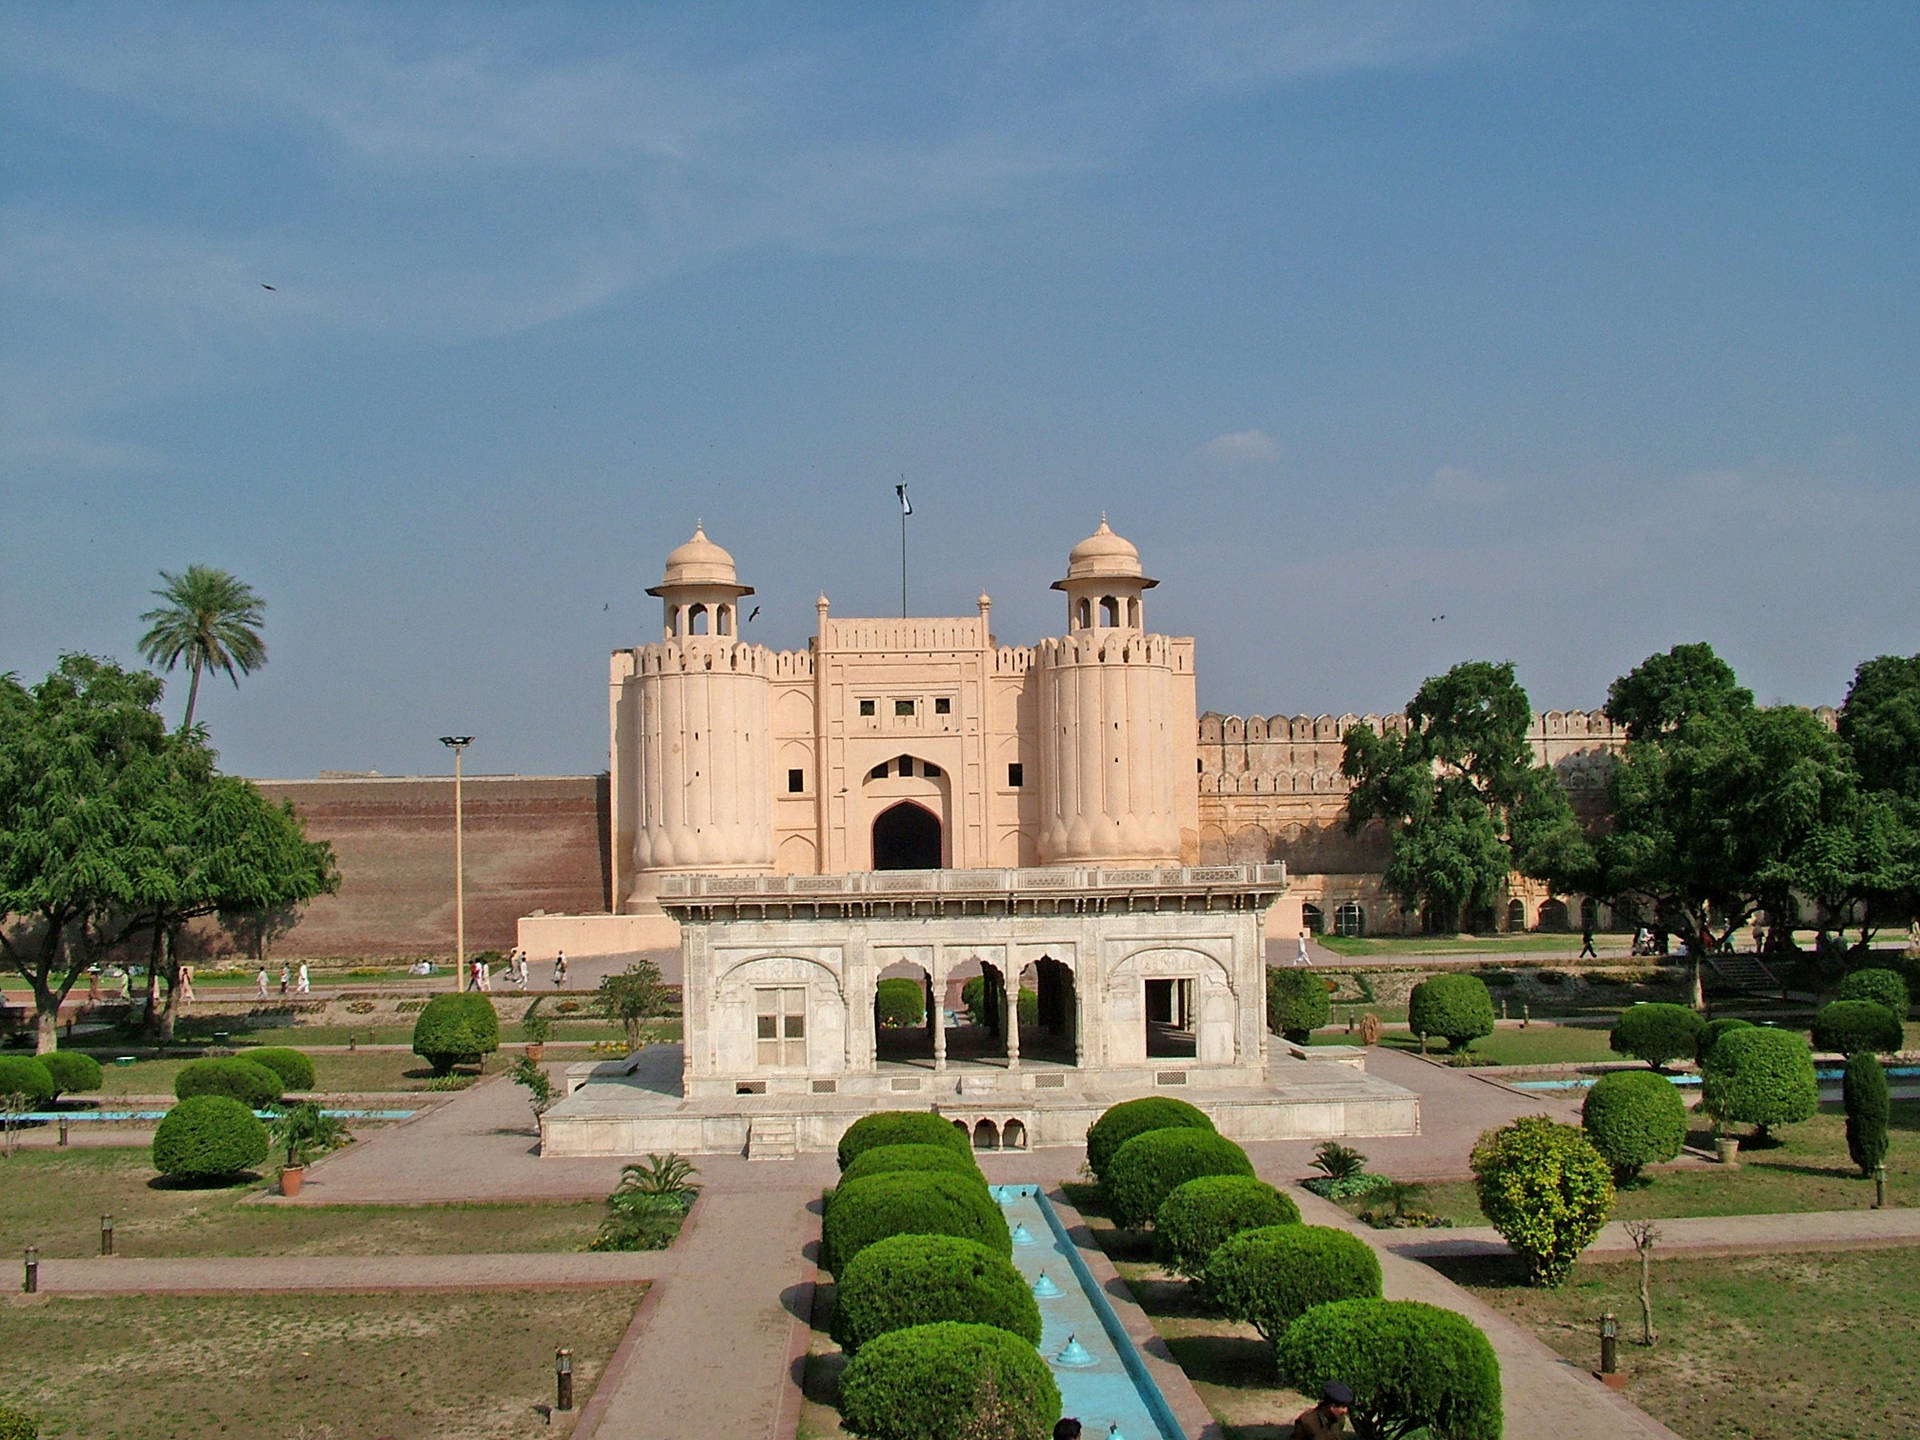 Majestic Lahore Fort With Hazuri Bagh In The Foreground. Background